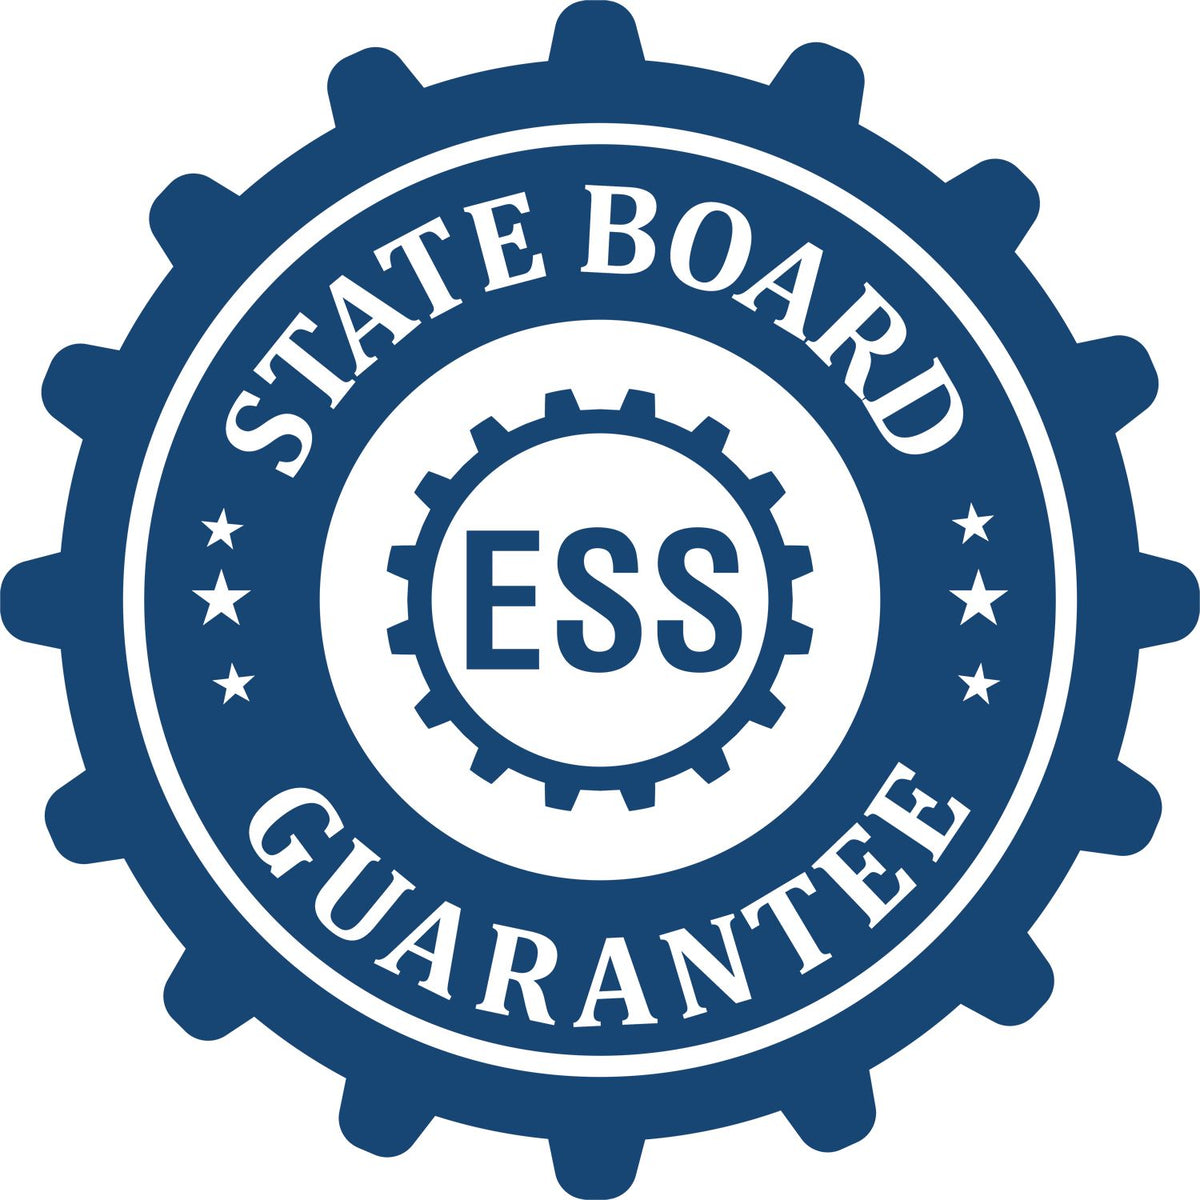 An emblem in a gear shape illustrating a state board guarantee for the State of South Dakota Extended Long Reach Engineer Seal product.